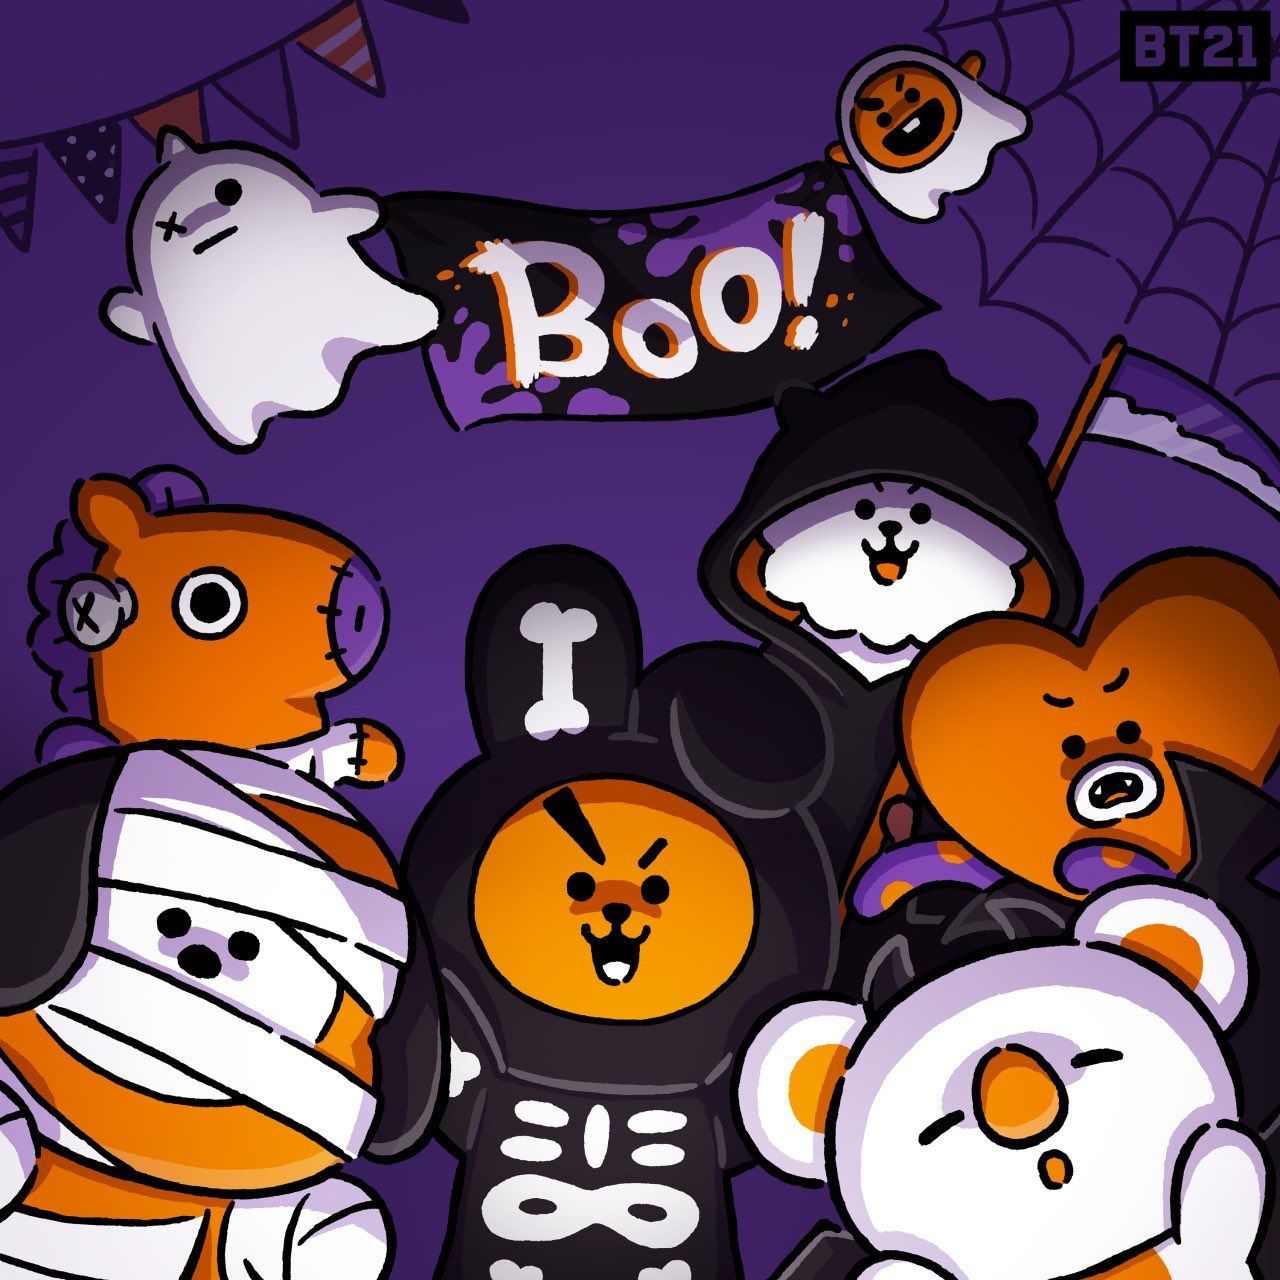 BT21 the BOO crew for a frightfully good time!